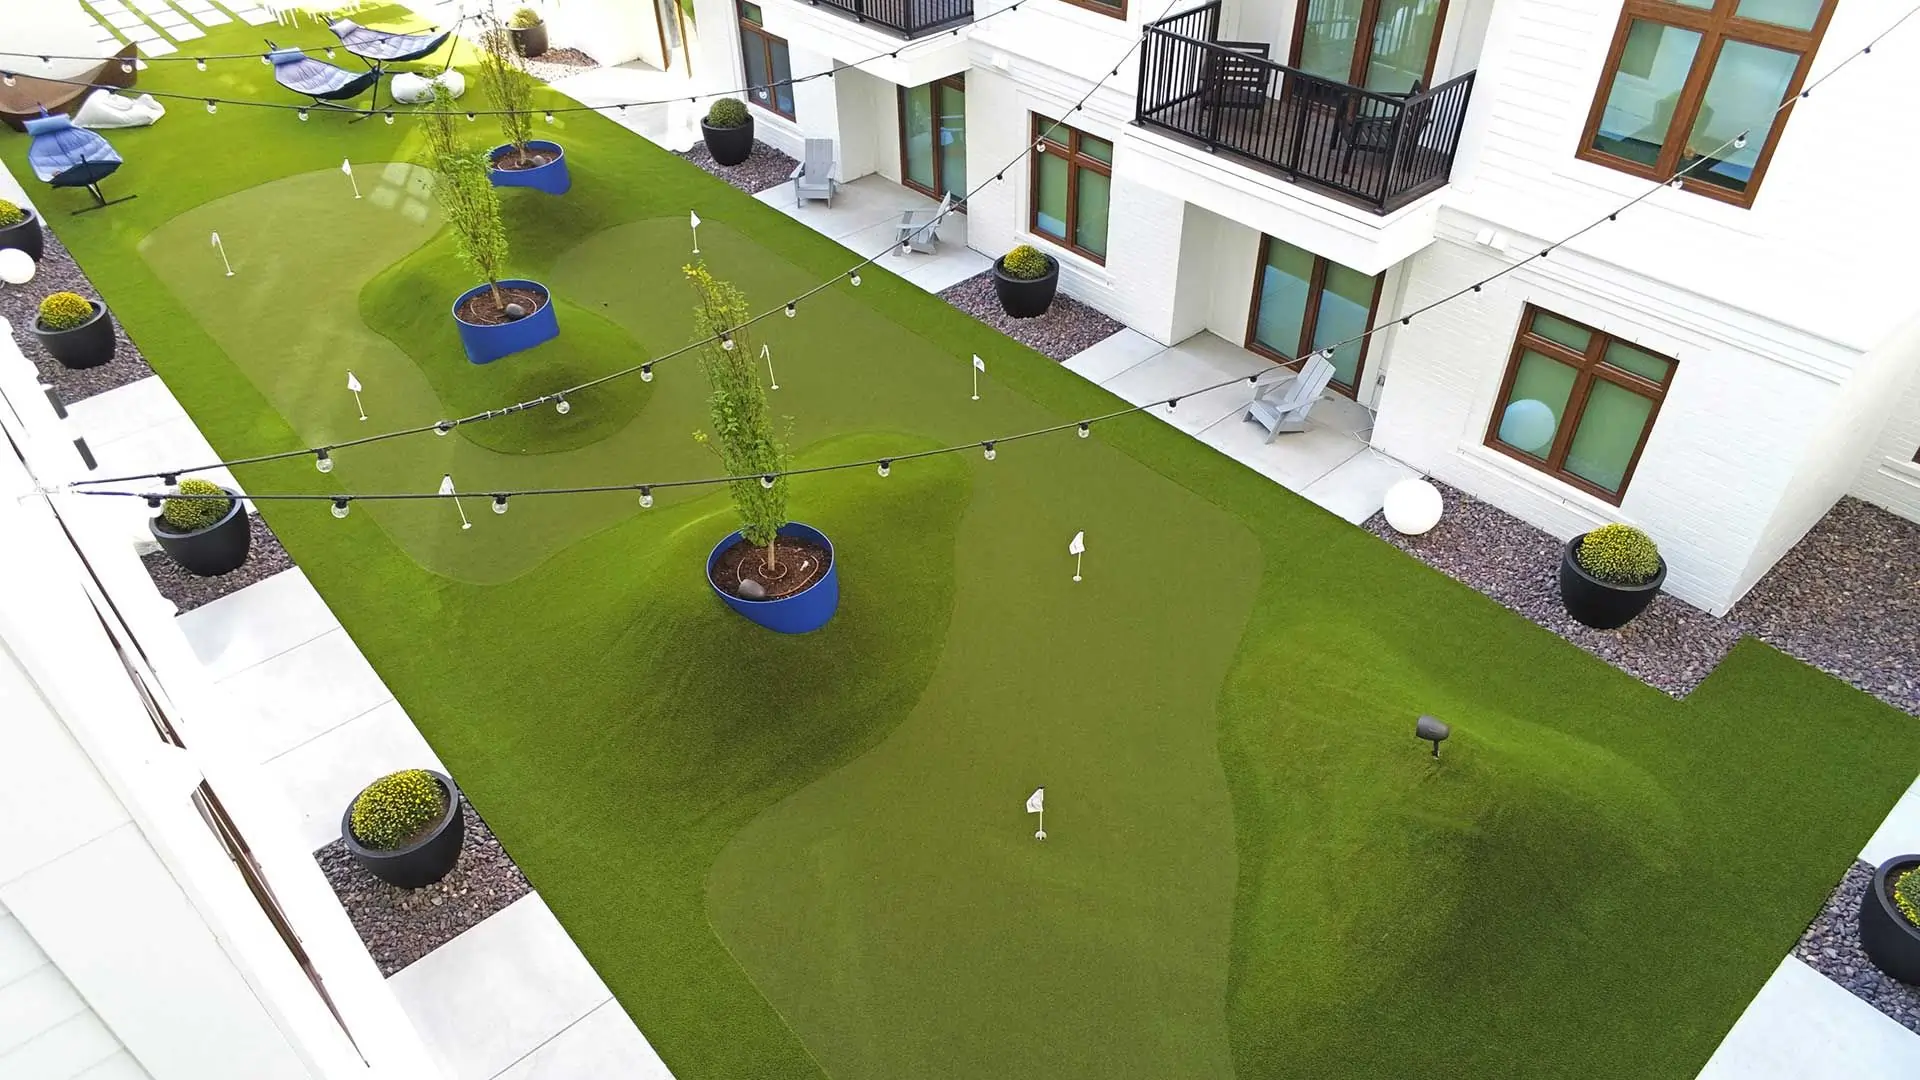 Artificial grass apartment lawn from SYNLawn